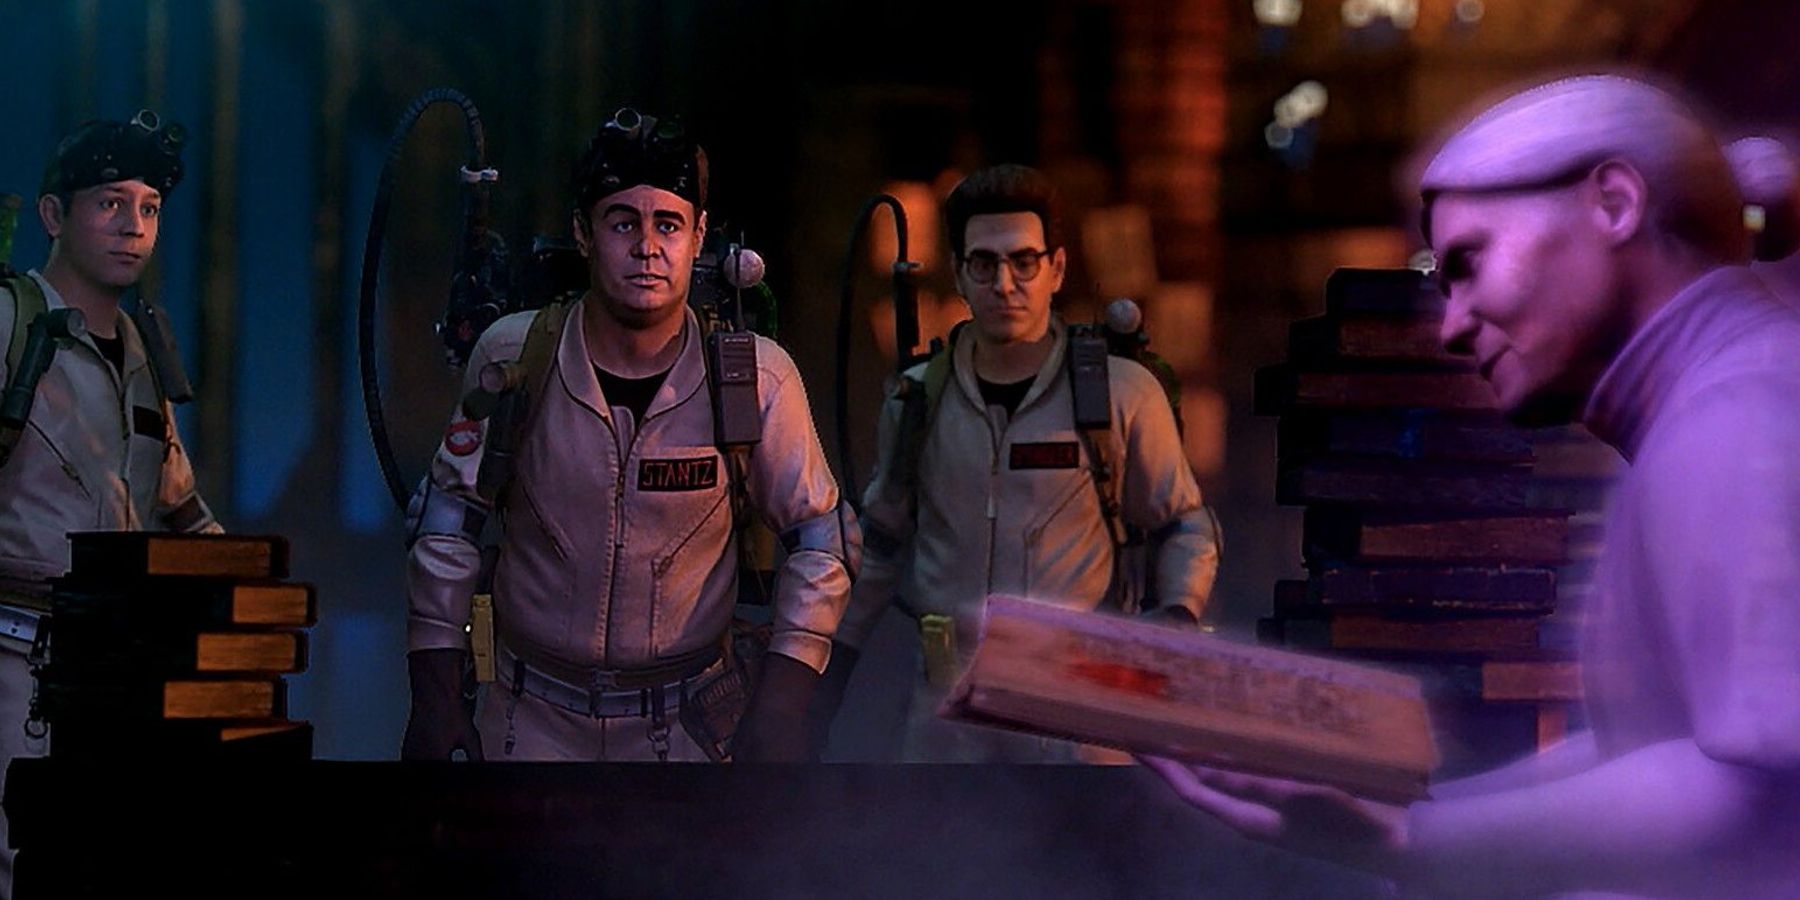 library ghost, ray, egon and recruit